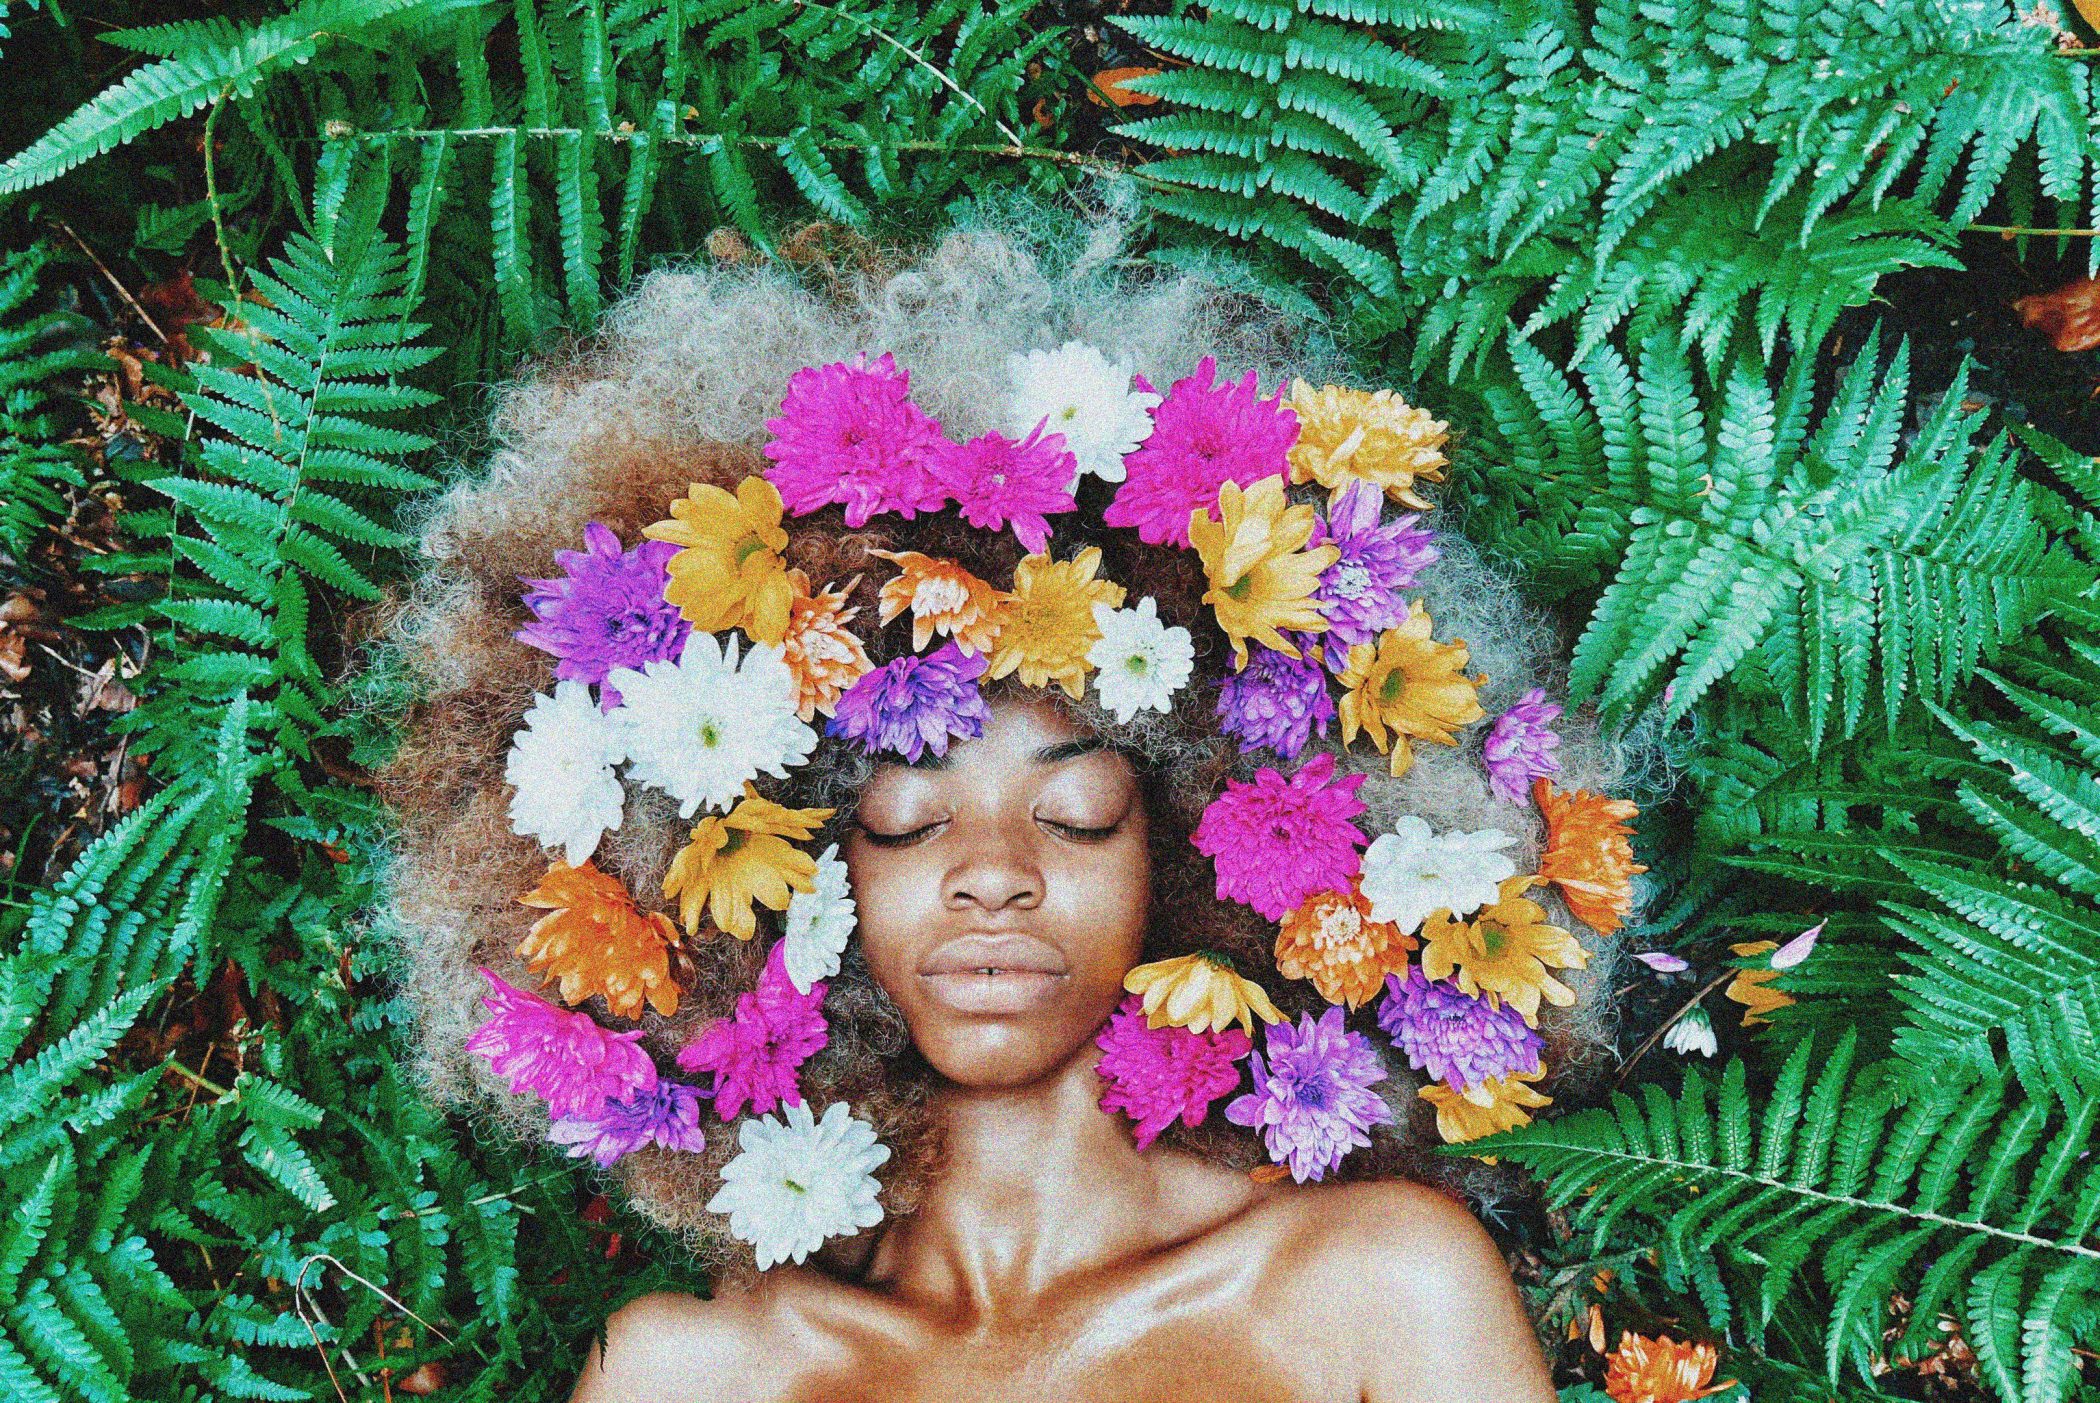 Woman laying down in green leaves with flowers in her hair.